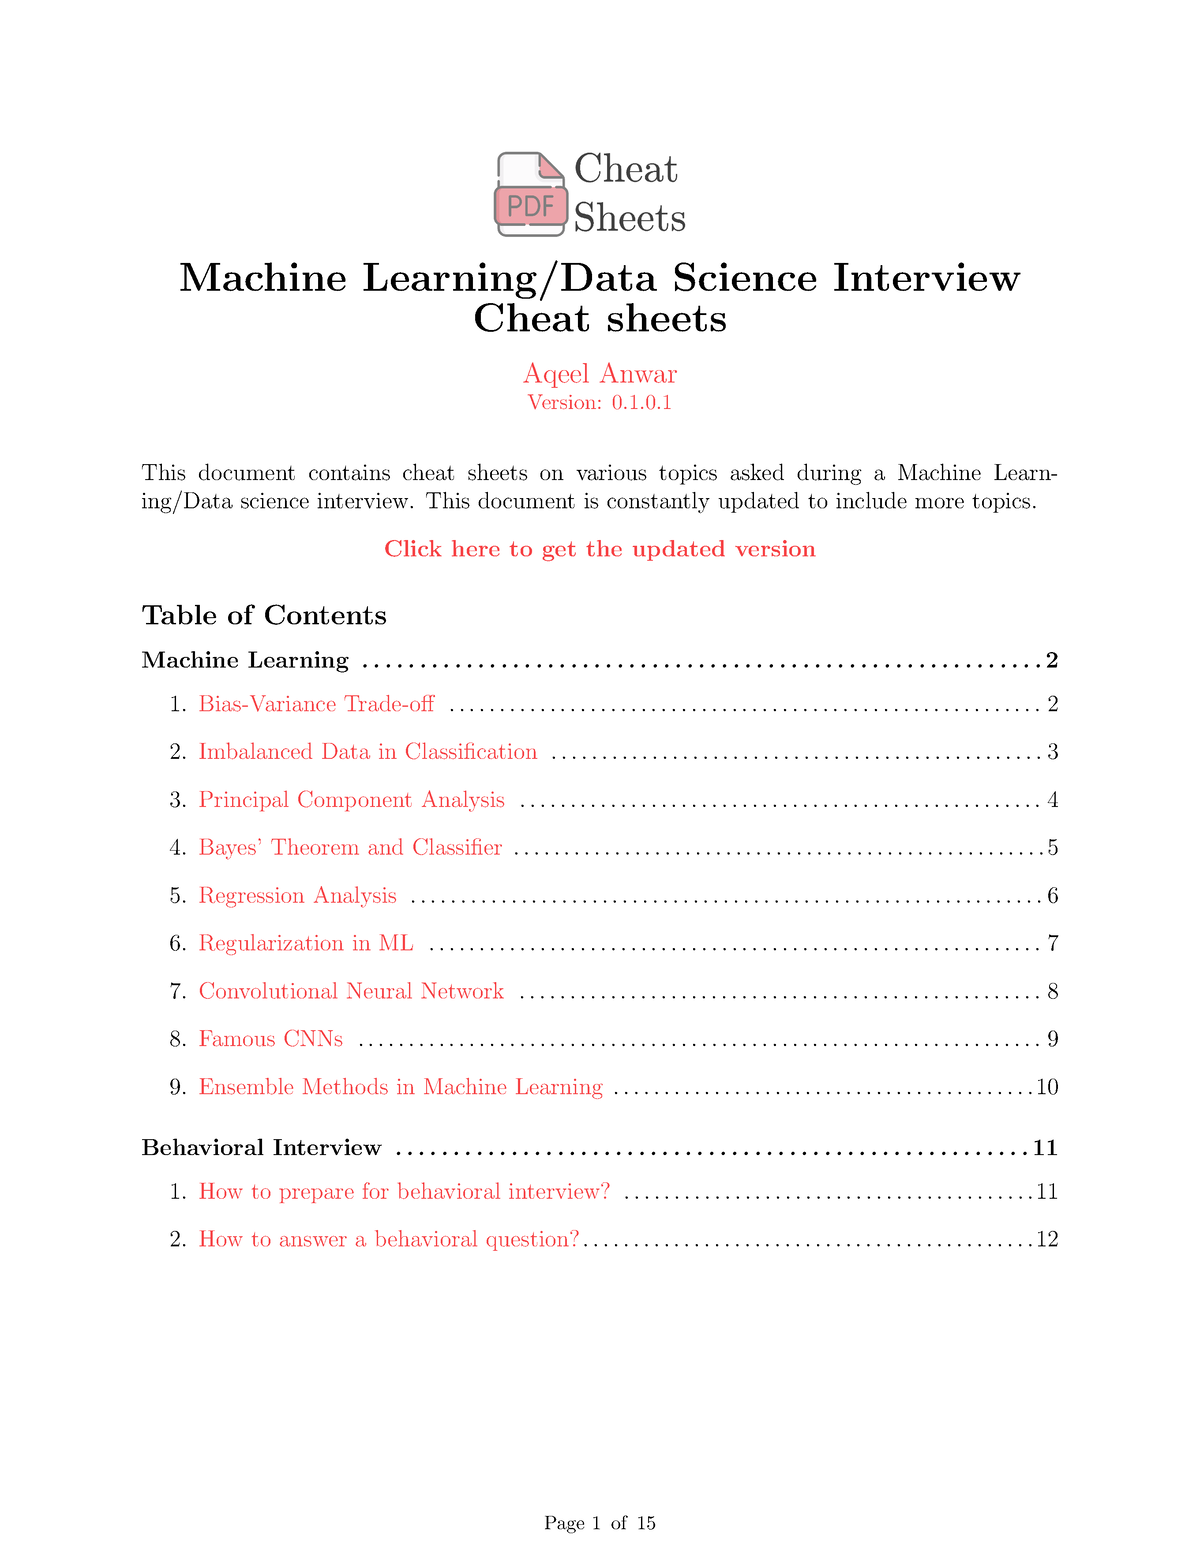 ml case study interview questions